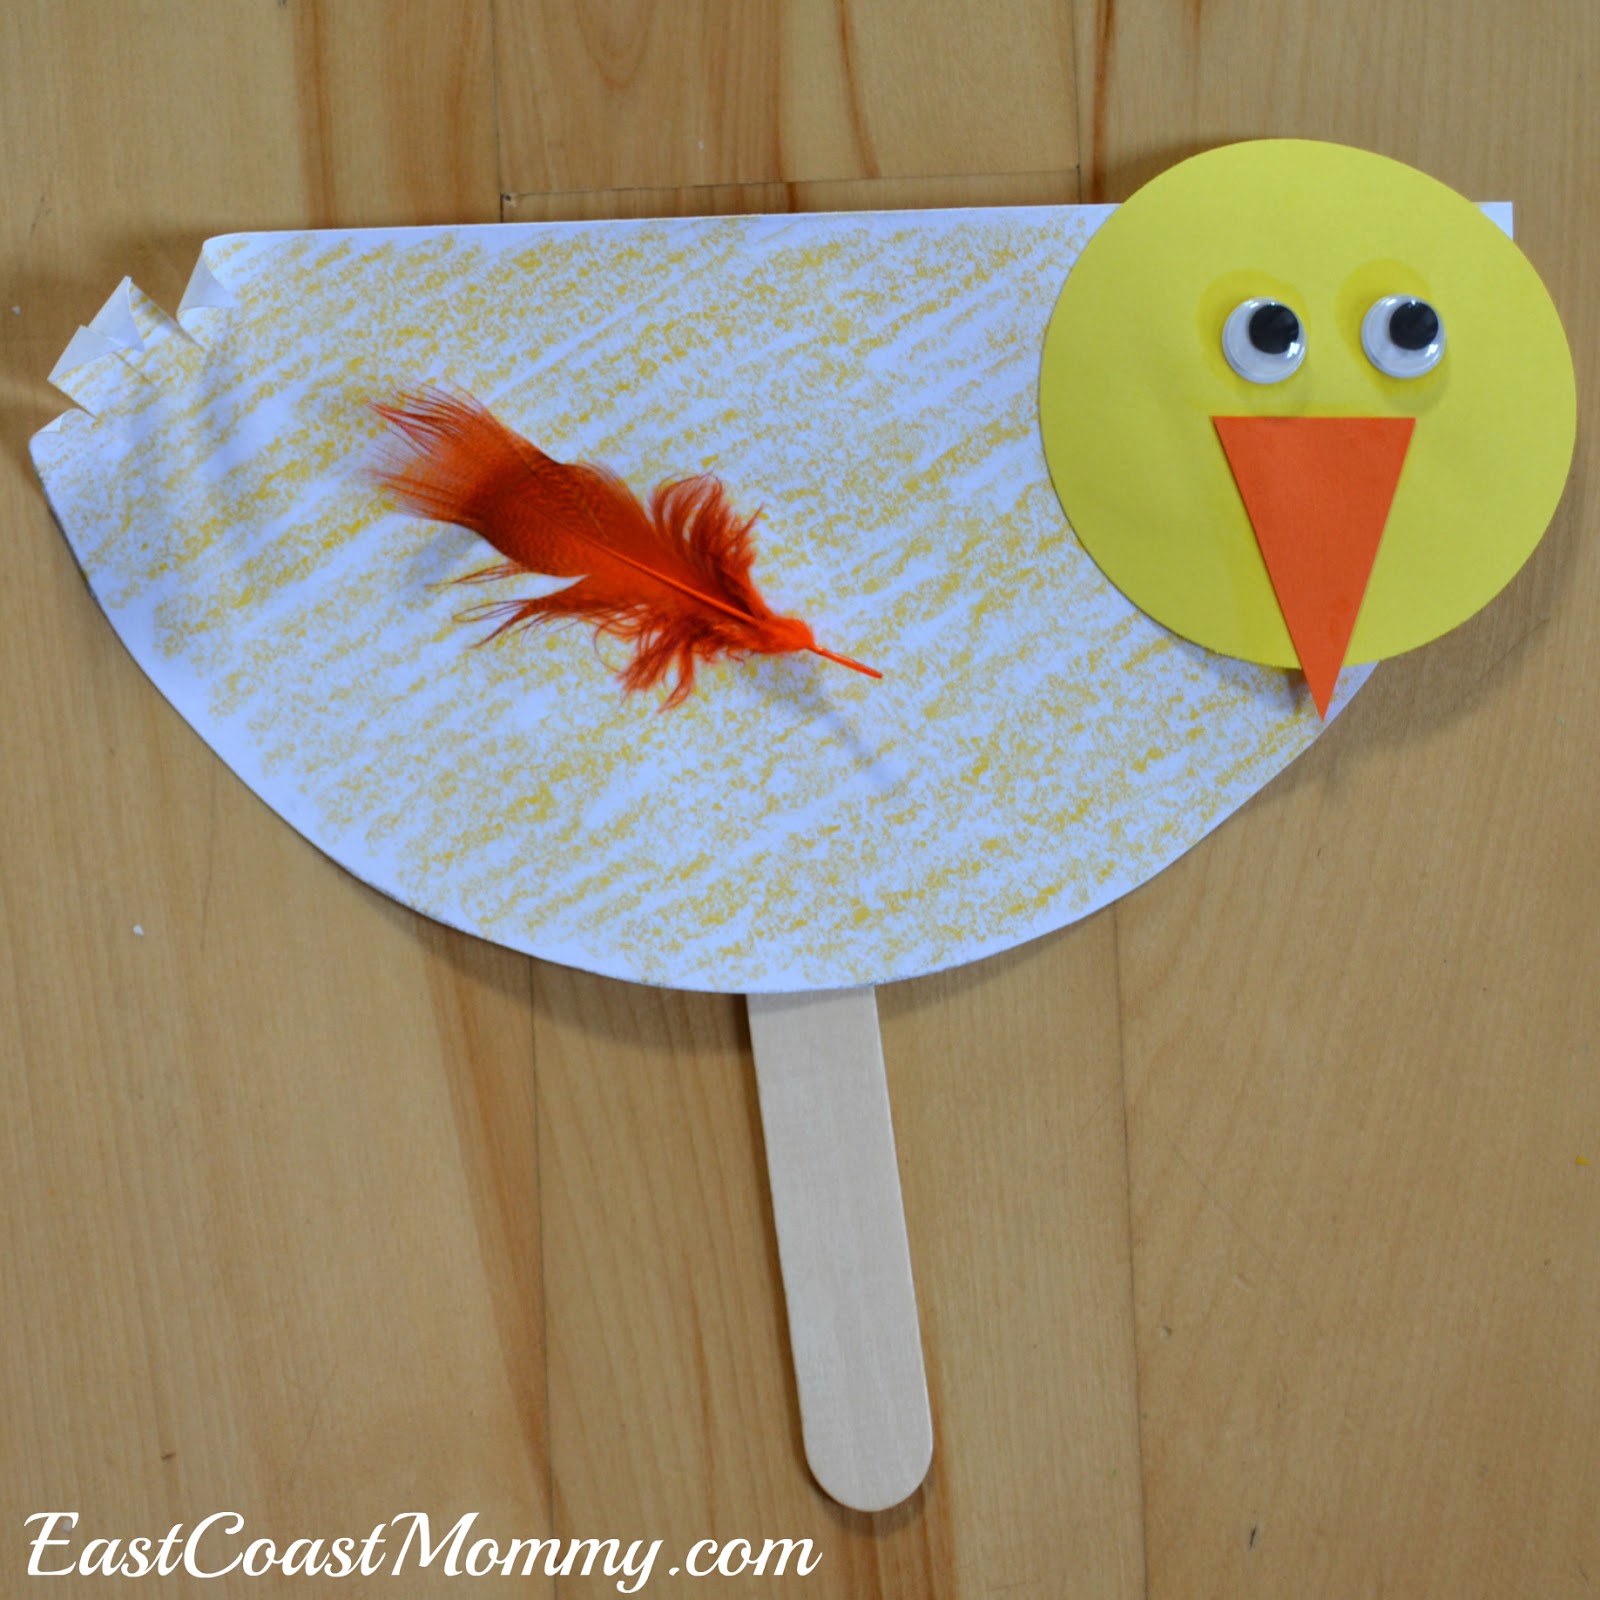 East Coast Mommy: Alphabet Crafts - Letter D